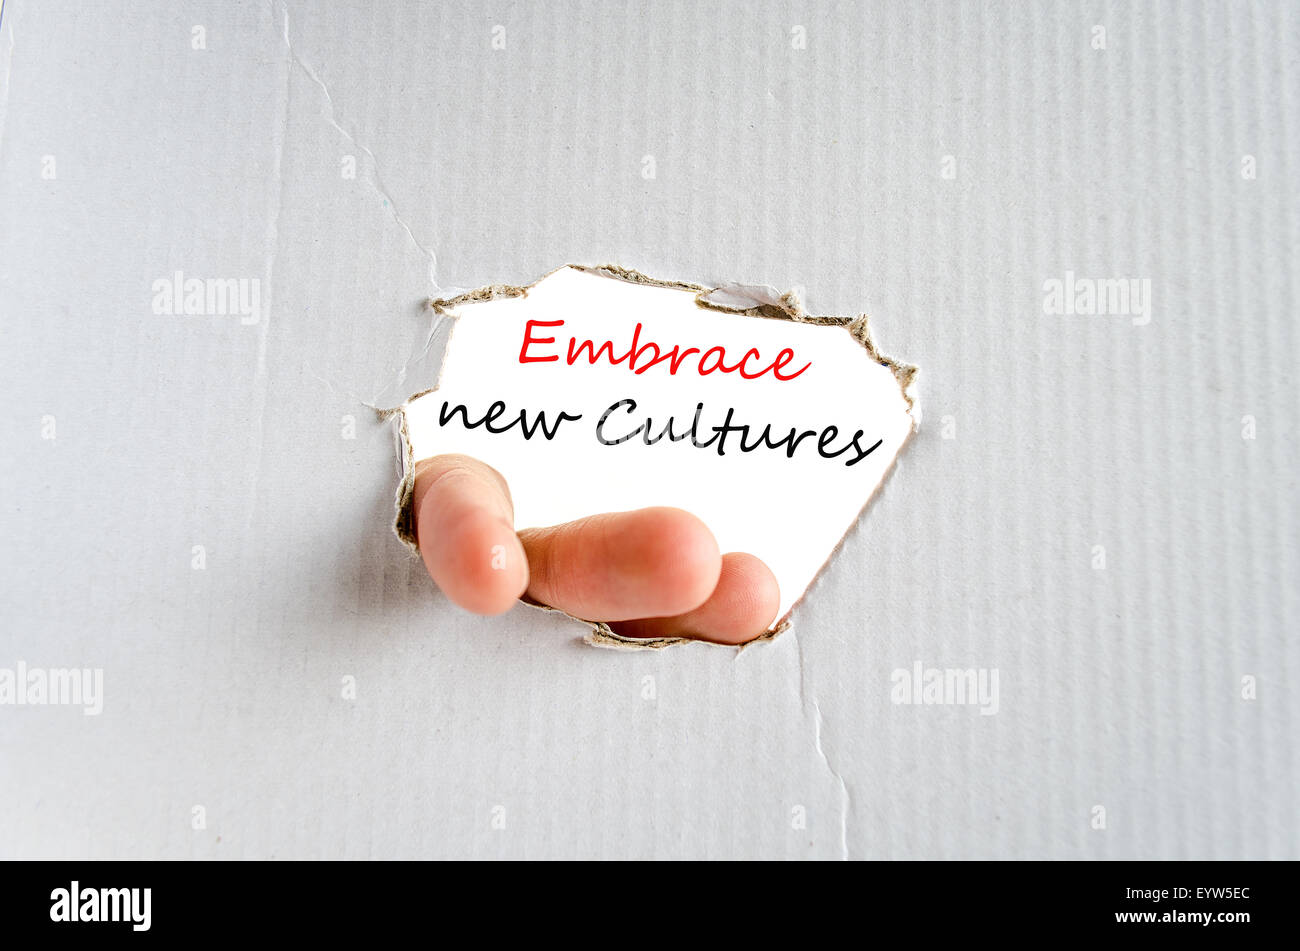 Embrace new cultures text concept isolated over white background Stock Photo